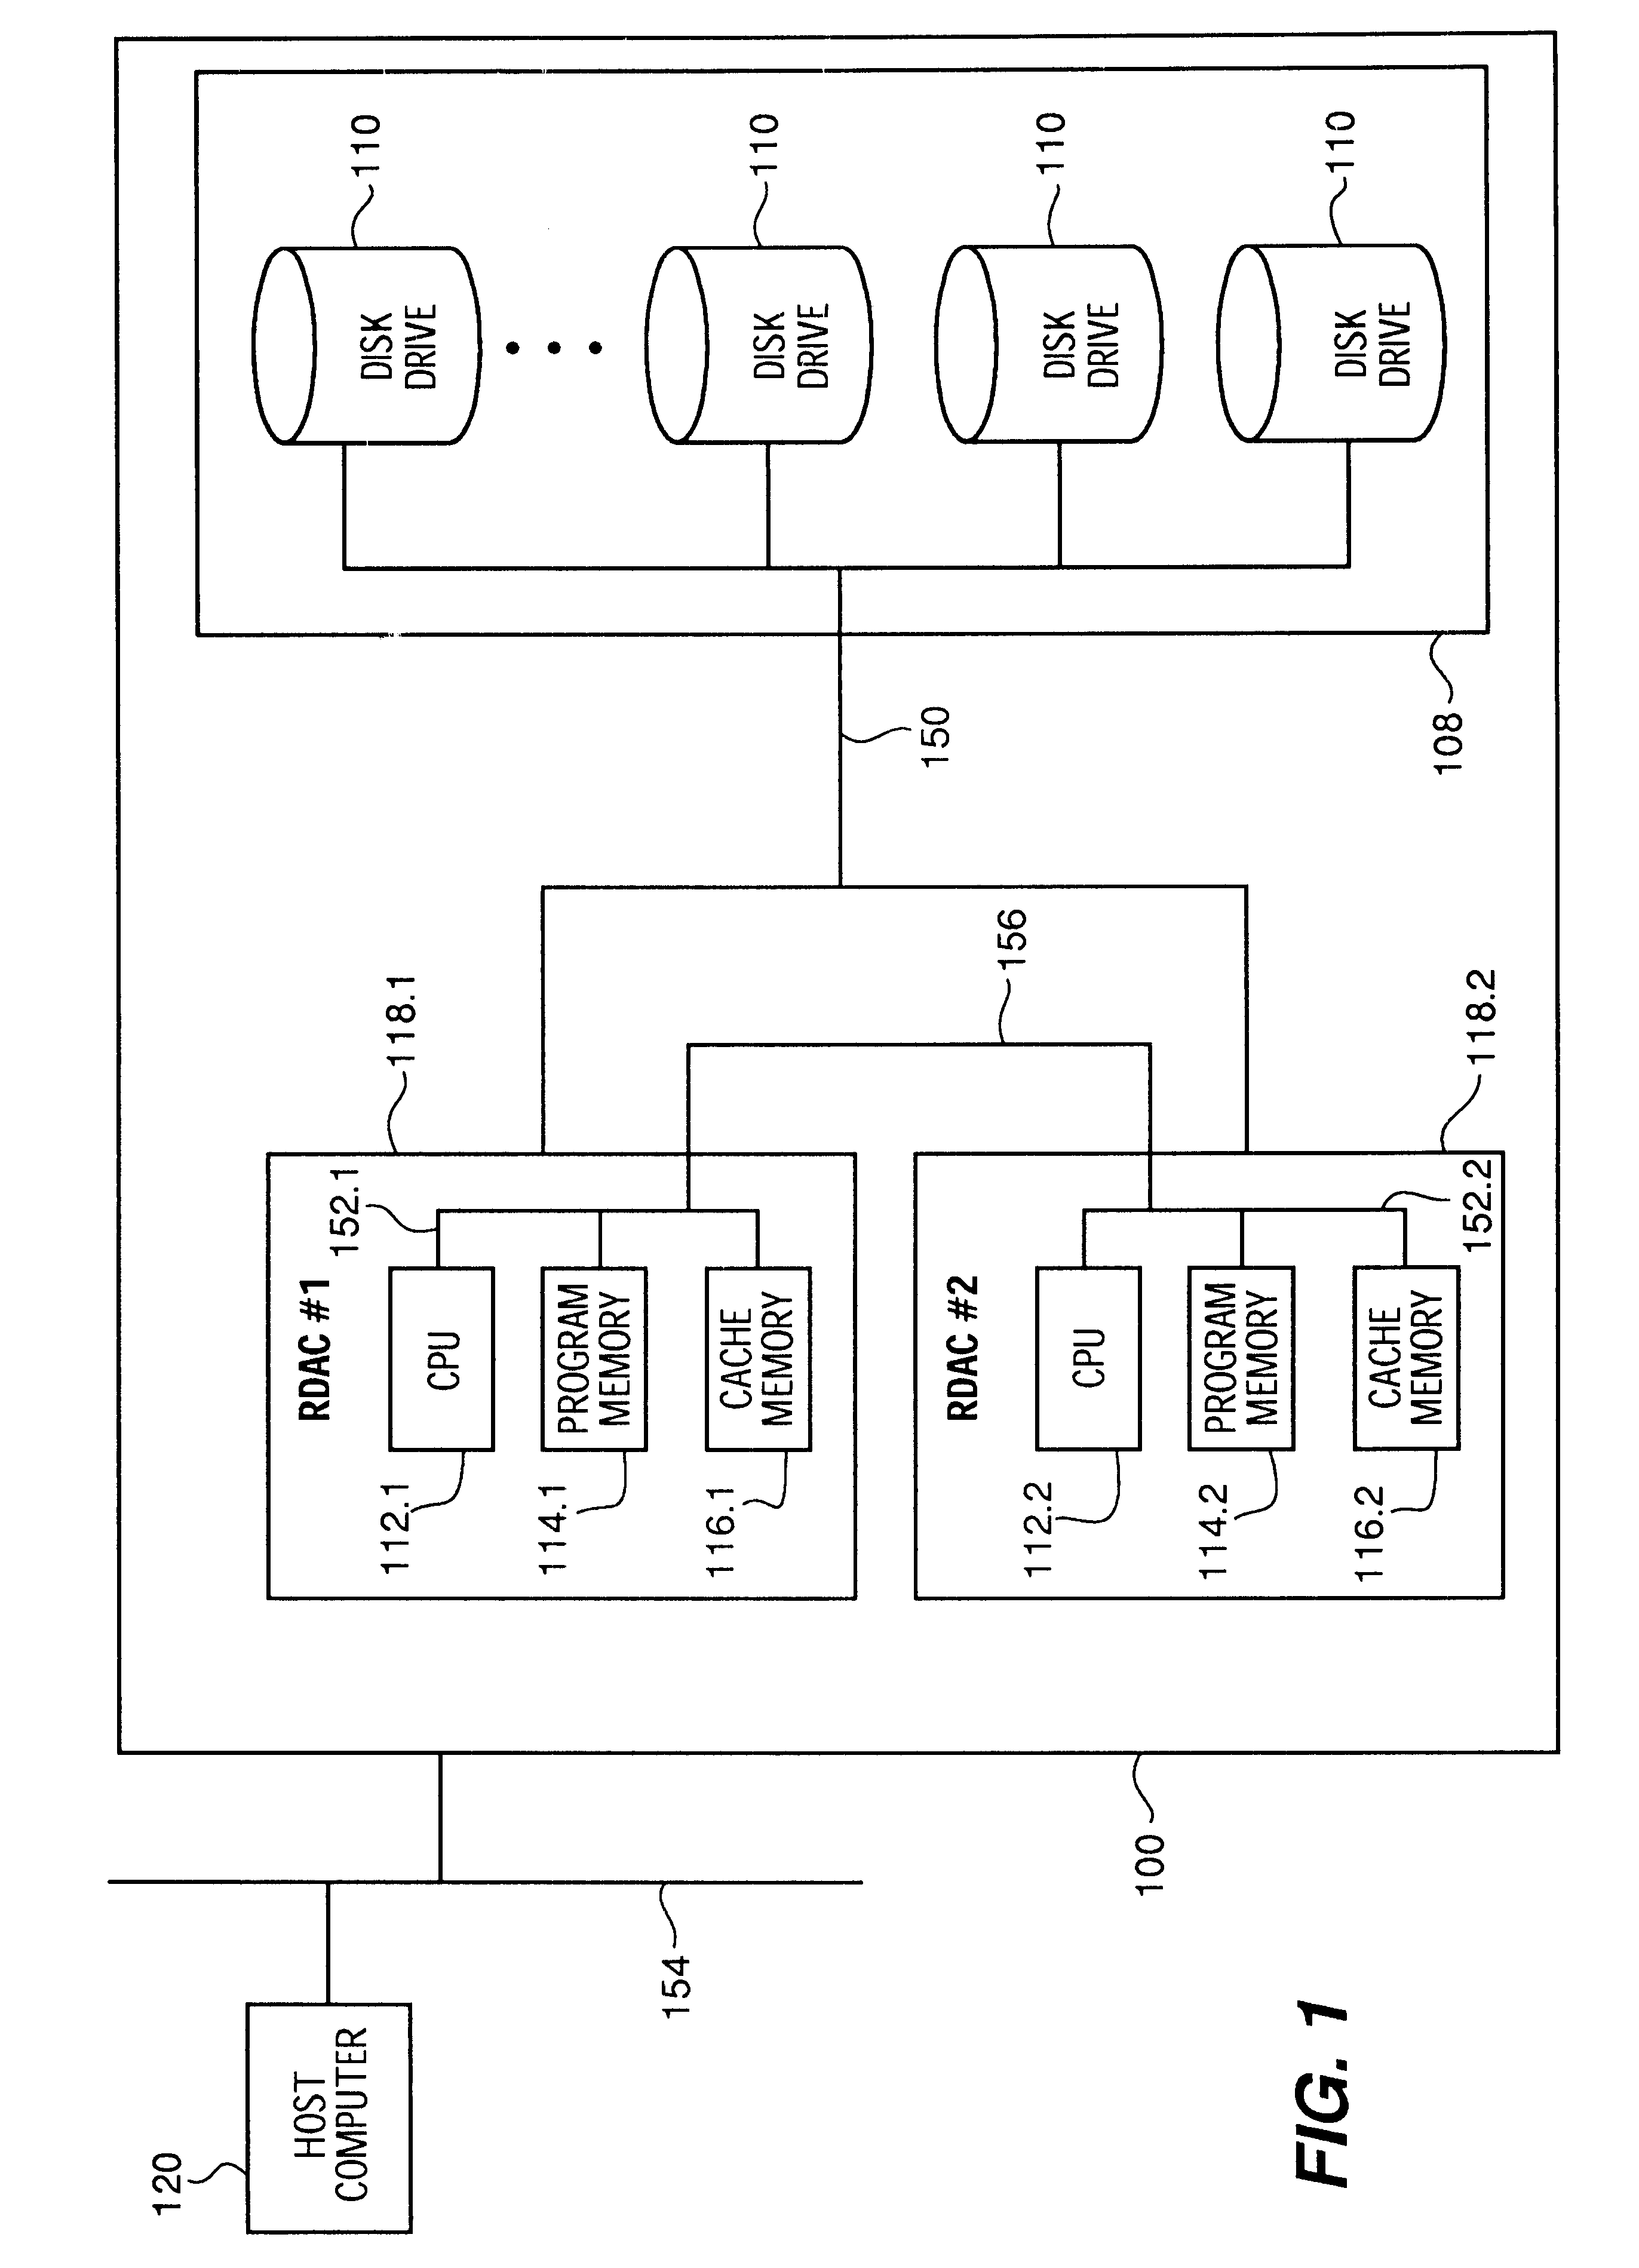 Apparatus and method to provide virtual solid state disk in cache memory in a storage controller